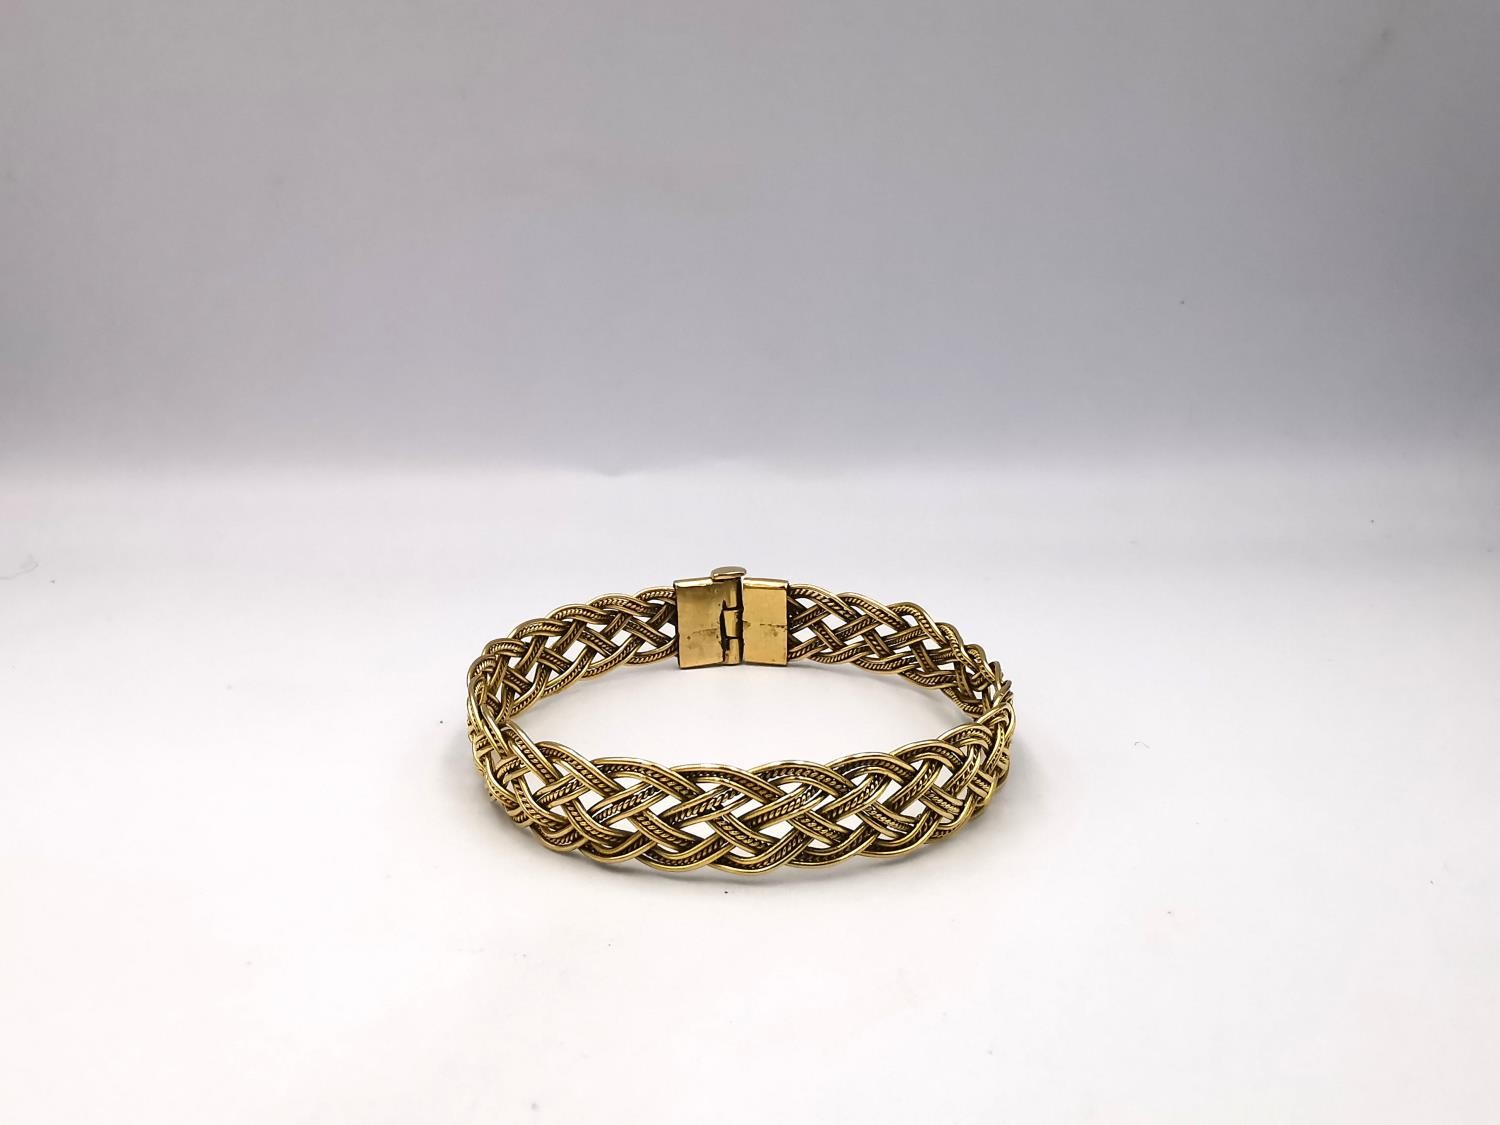 A woven gold plated wirework plaited bracelet with pin fastening. Diameter 6cm. Weight 18.62g. - Image 4 of 10